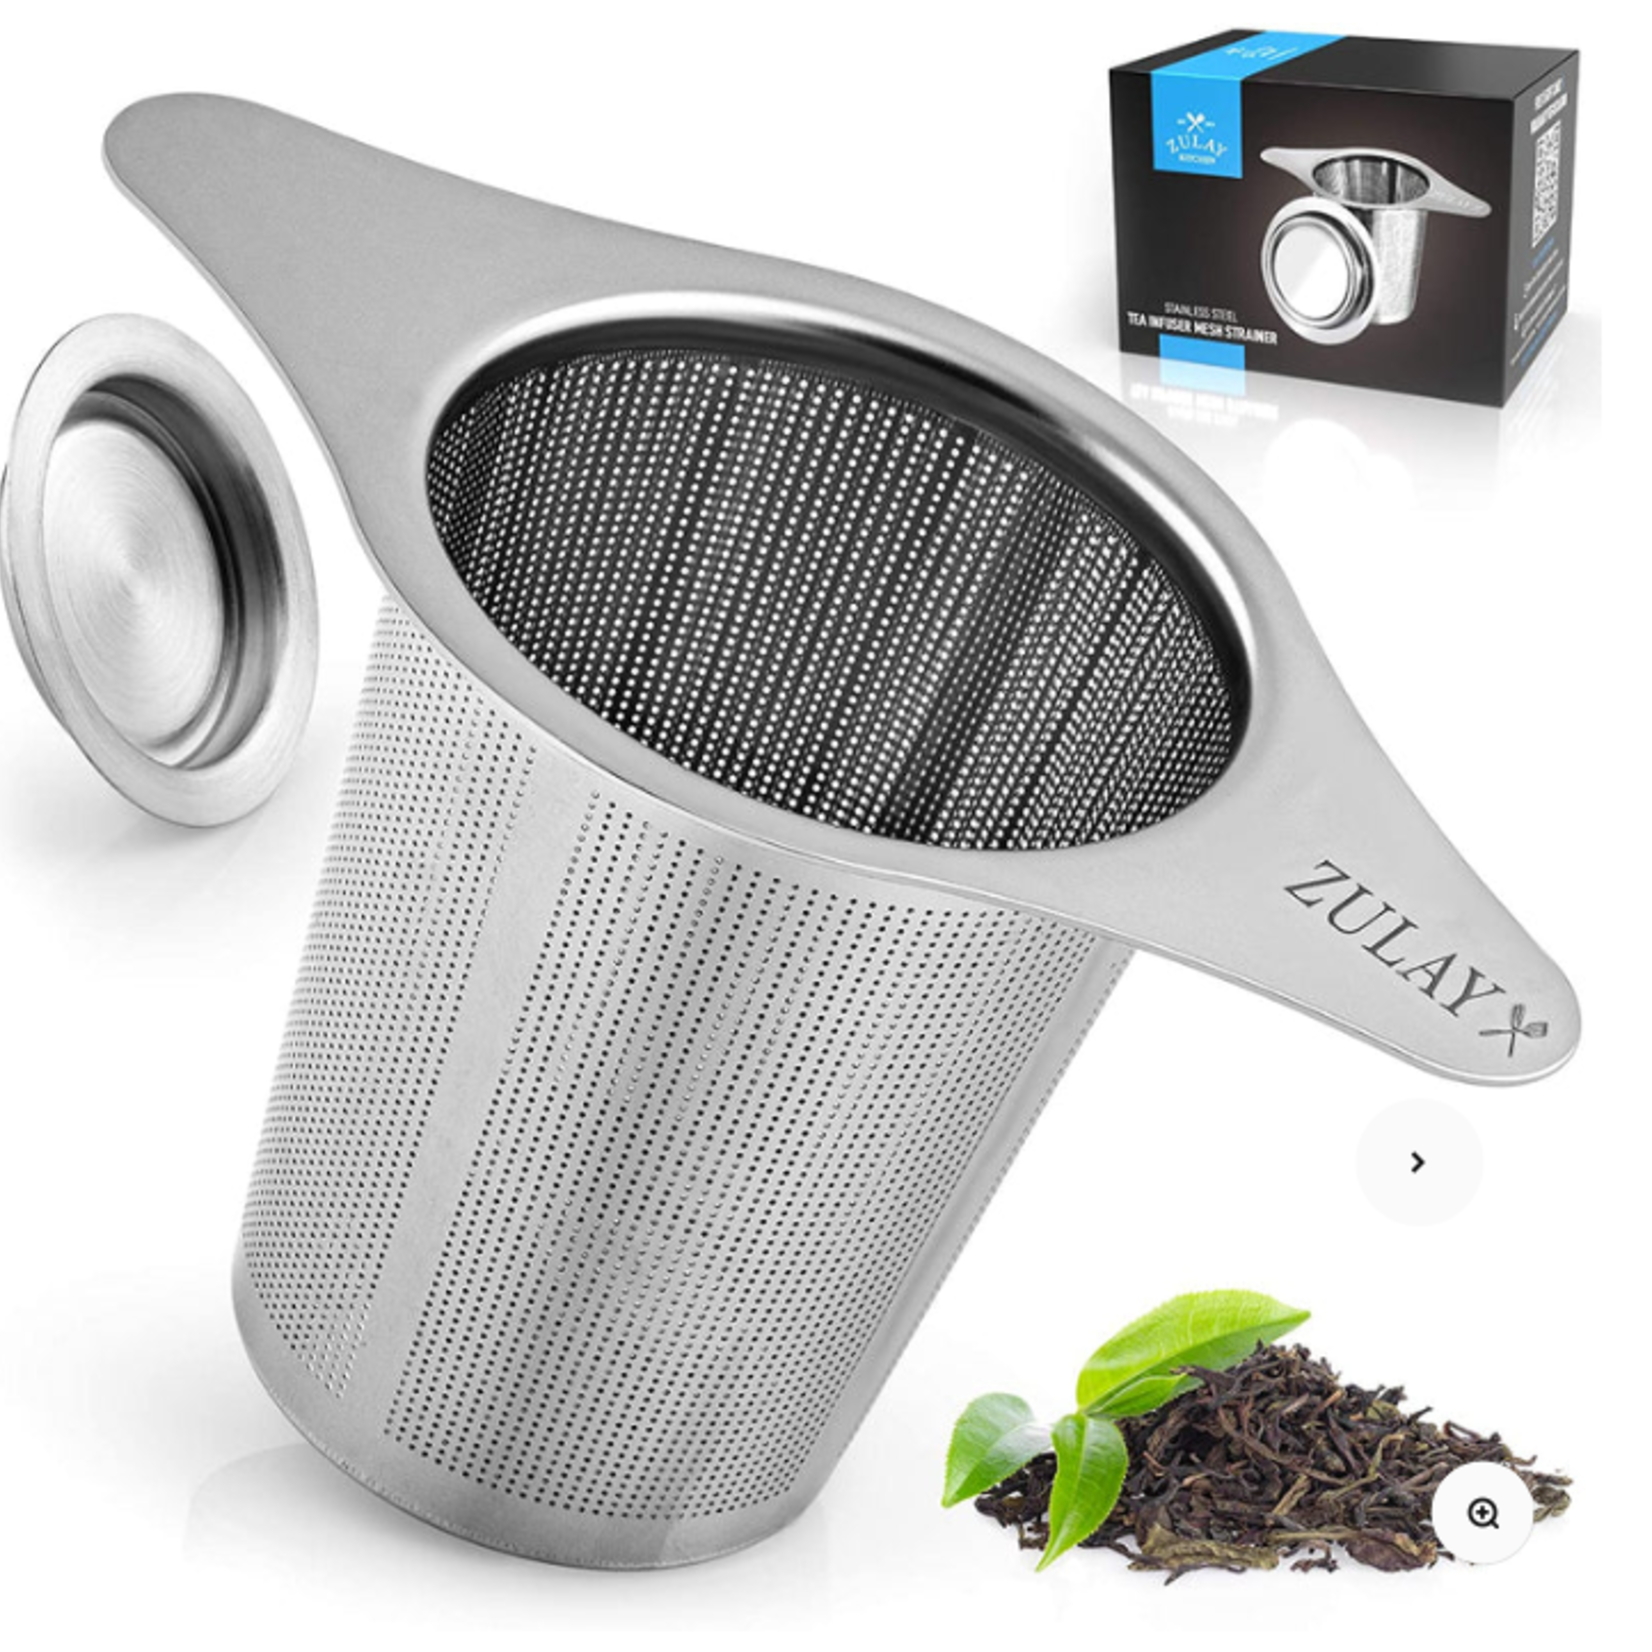 Zulay Kitchen Large Stainless Steel Tea Filter for Loose Tea